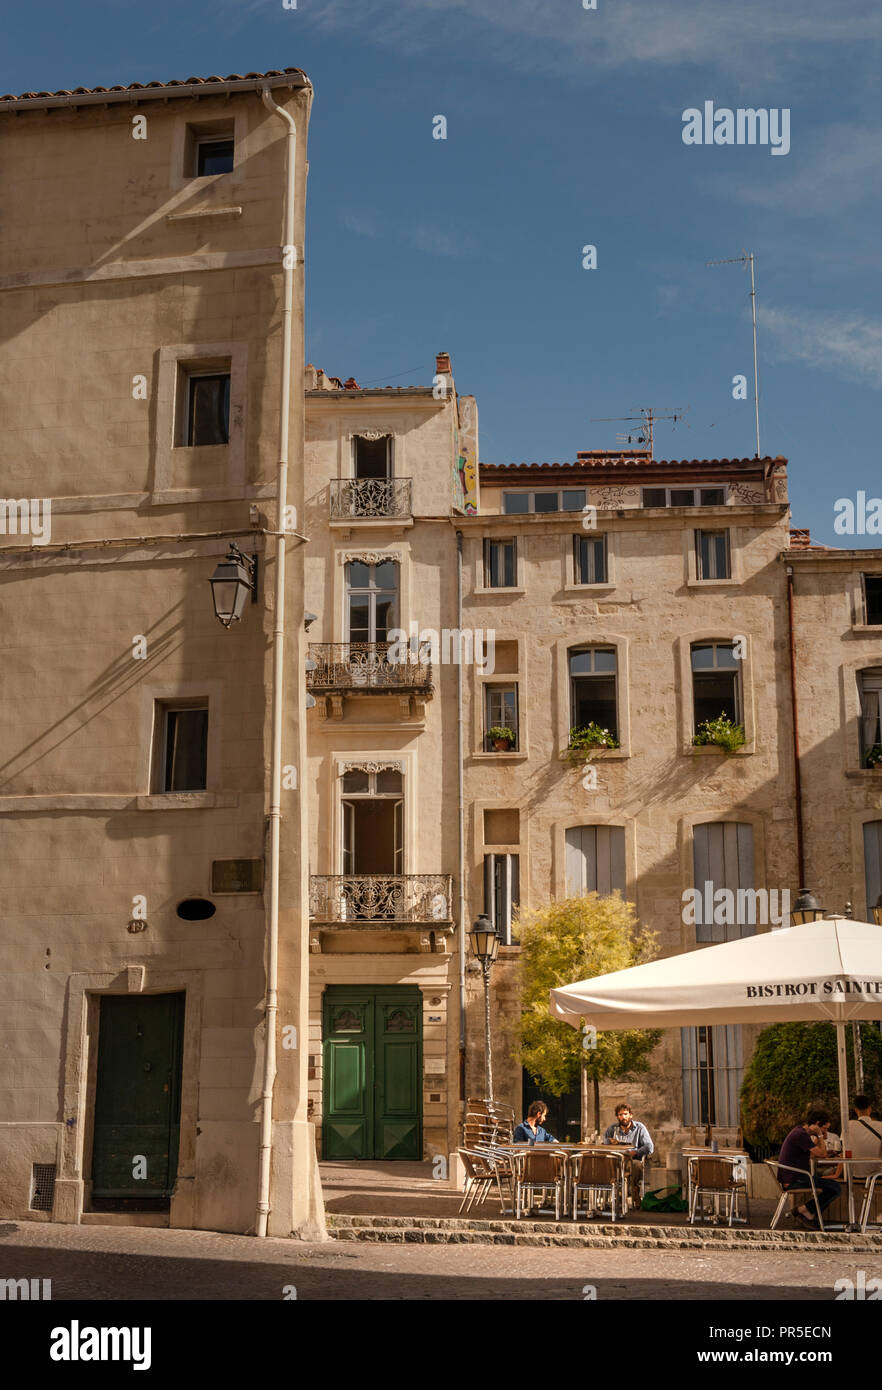 A typical inner city square full of flair is the Place Sainte-Anne in Montpellier with the bistro Sainte-Anne. Stock Photo